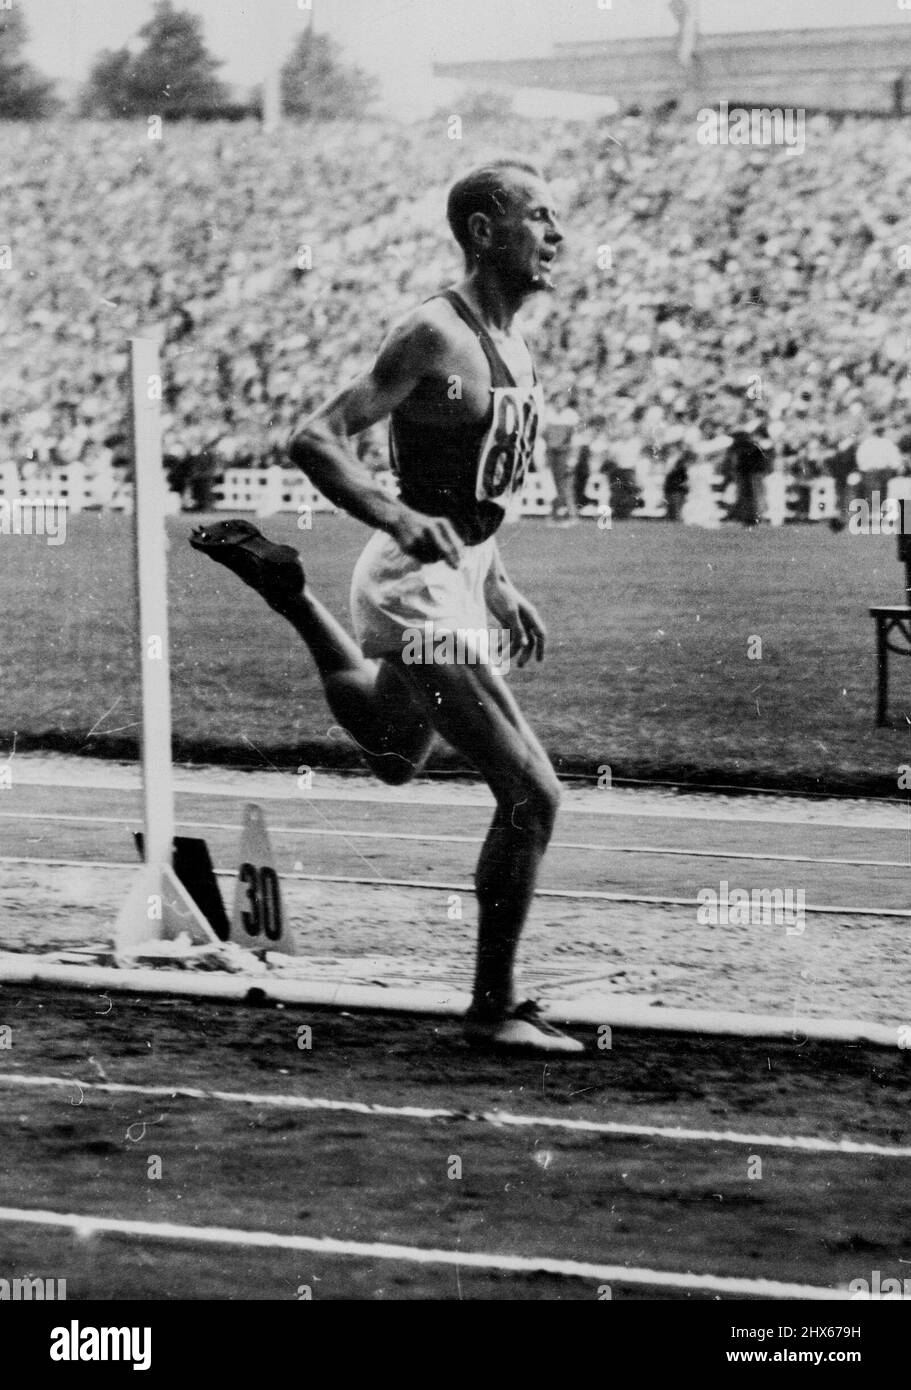 Zatopek Wins 5,000 Metres - And Sets Up New Games Record -- E. Zatopek, of Czechoslovakia, winning the 5,000 metres event at the European Games here. With a new Games championship time of 14 minutes, 3seconds, he was about a hundred yards ahead of A. Mimoun (France), who came second. Third was the Belgian Gaston Reiff, who defeated the Czech at Wembley in the 1948 Olympic Games. August 27, 1950. Stock Photo